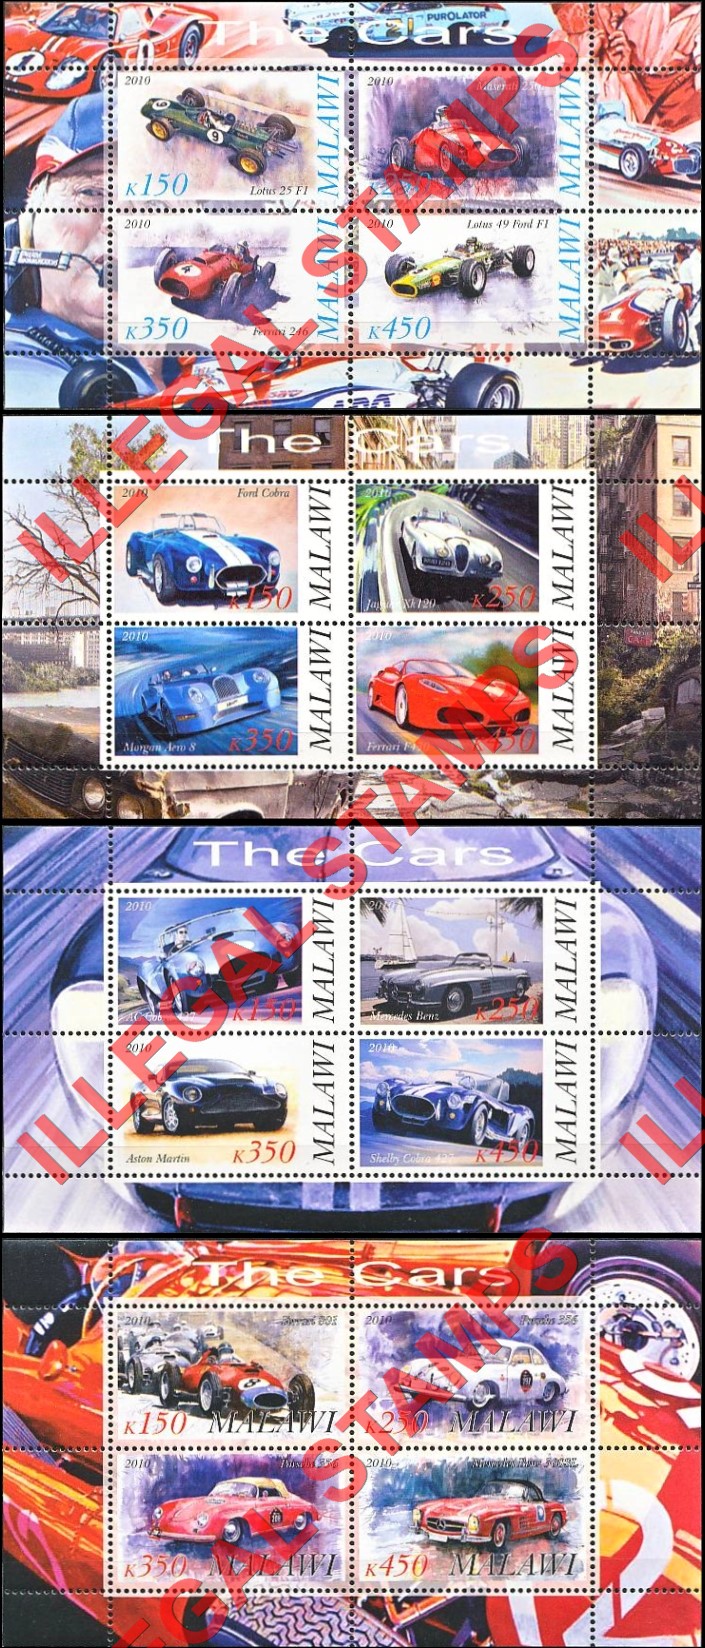 Malawi 2010 Cars Illegal Stamp Souvenir Sheets of 4 (Part 2)